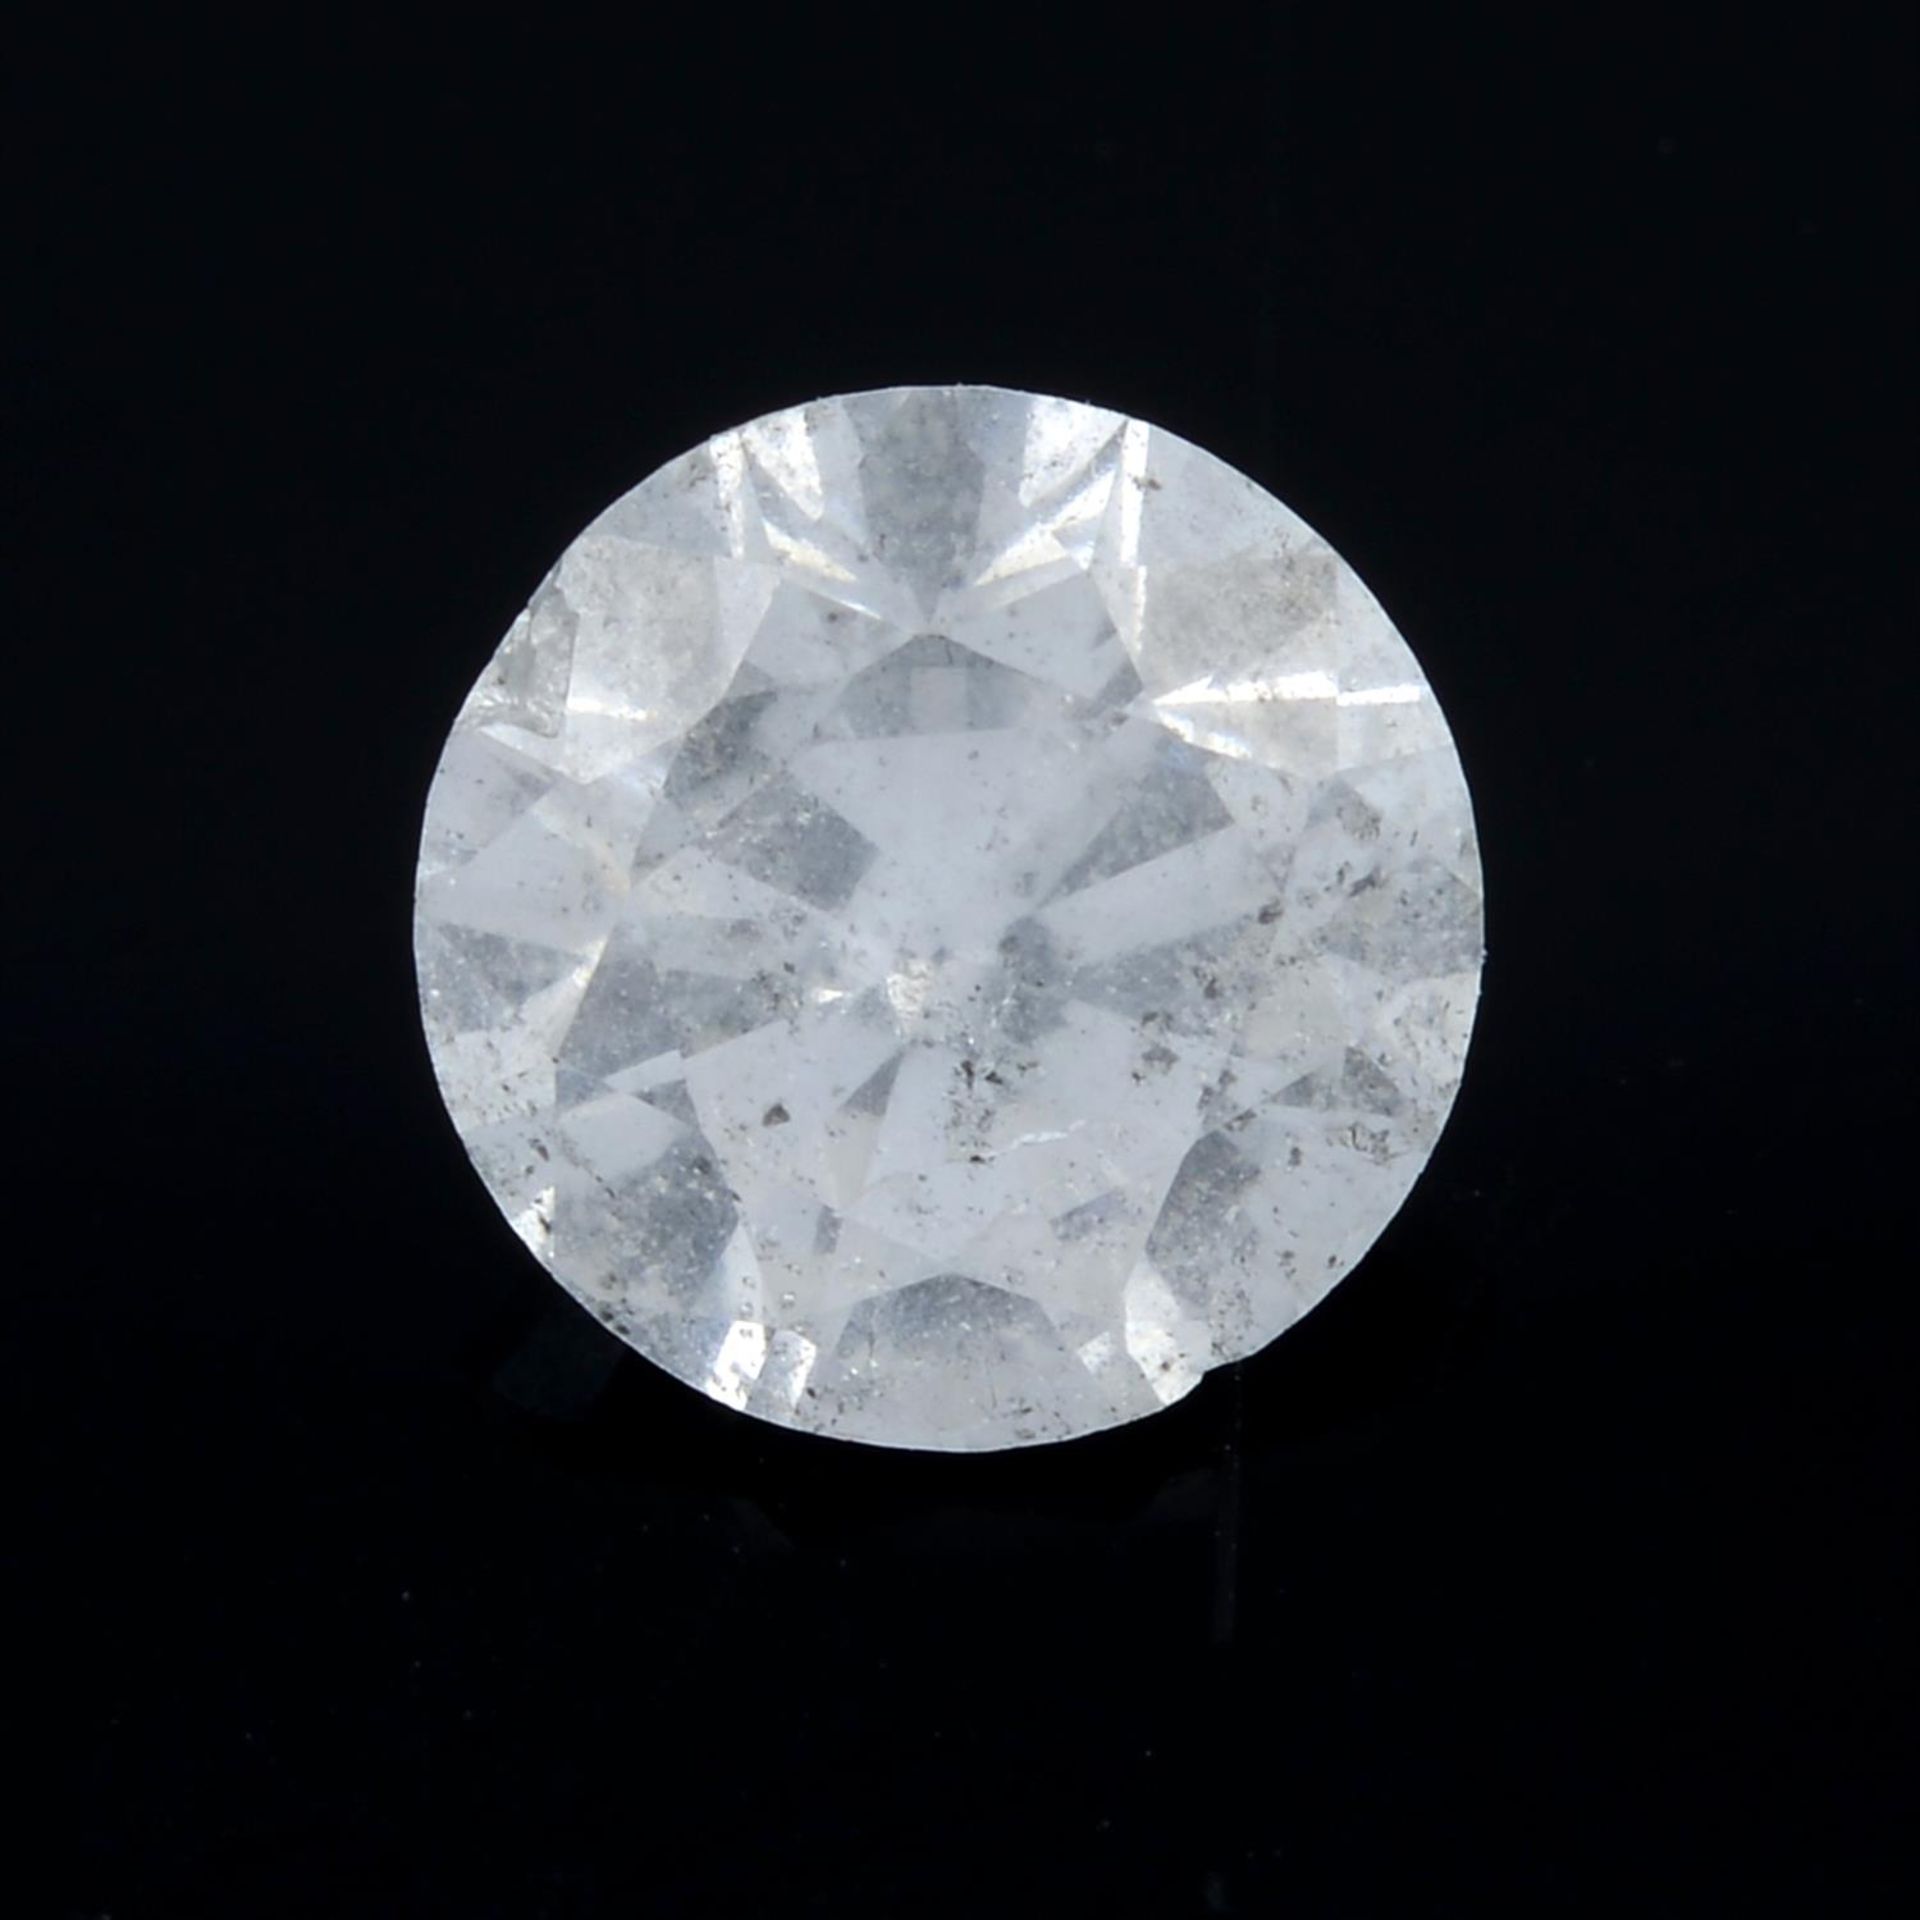 A brilliant cut diamond, weighing 1.02ct. Estimated to be G colour and I2 clarity